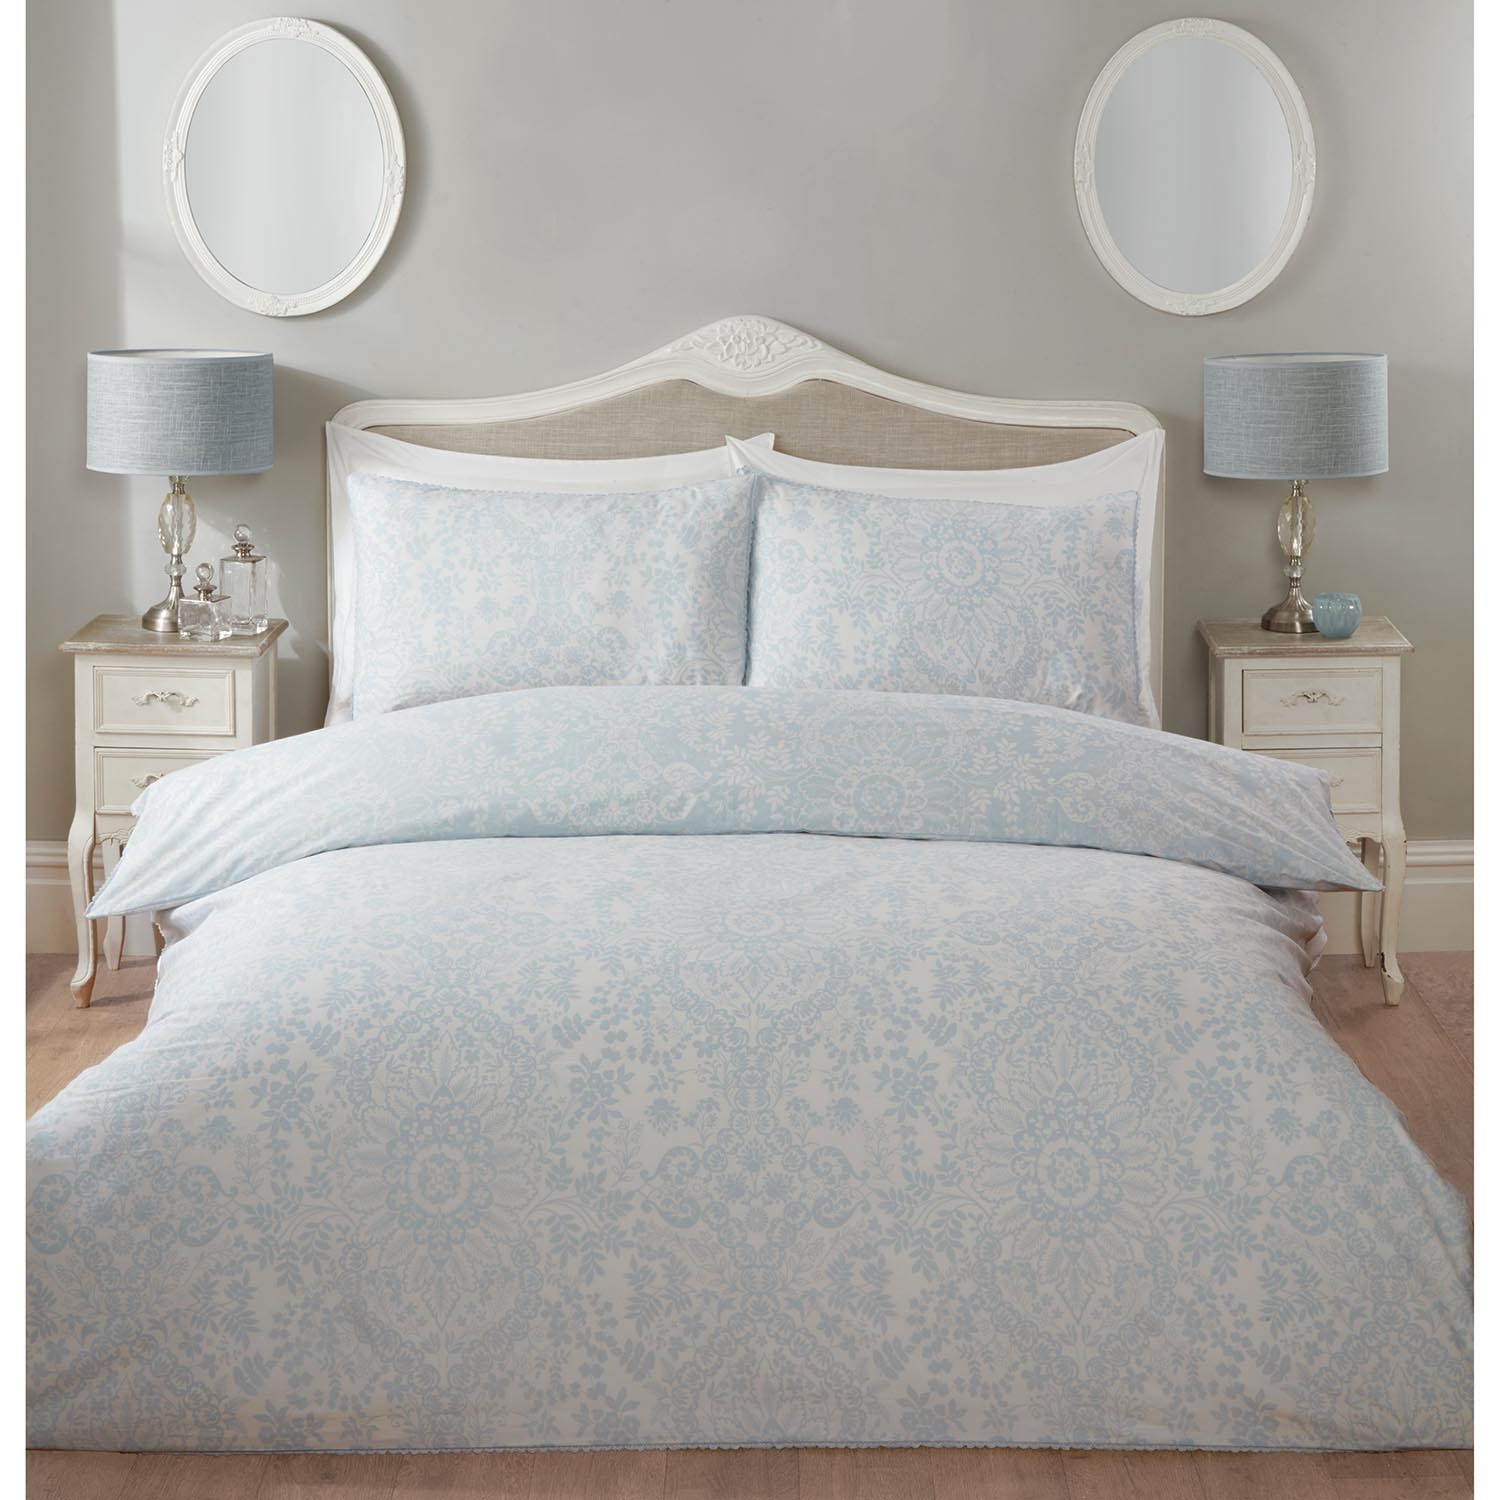 Elodie Paisley Duvet Cover and Pillowcase Set - Blue / Superking Image 1